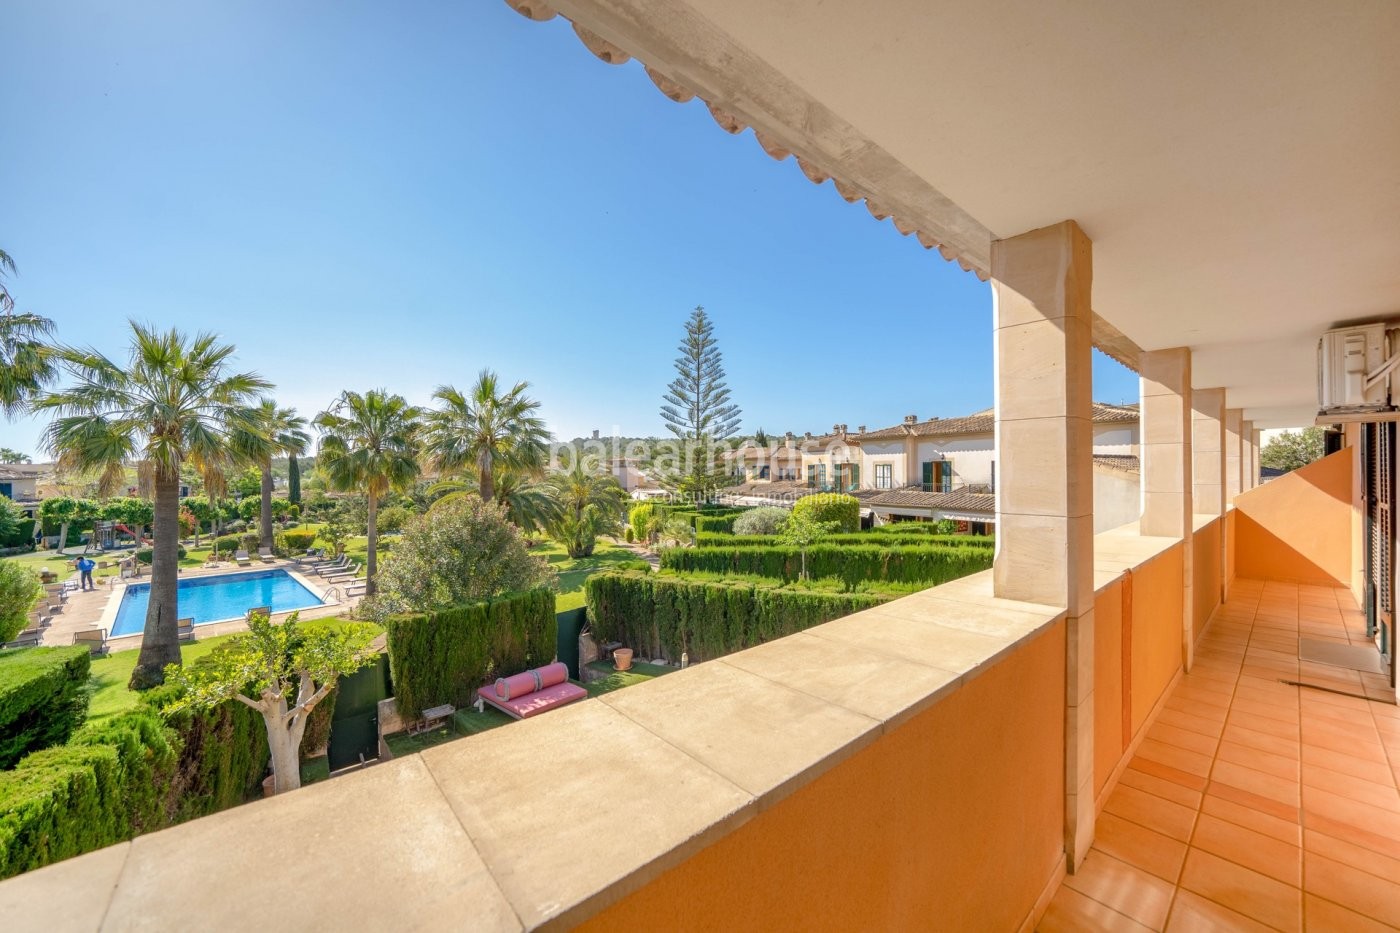 Large villa with modern light-filled spaces and extensive garden in the green lung of Palma.